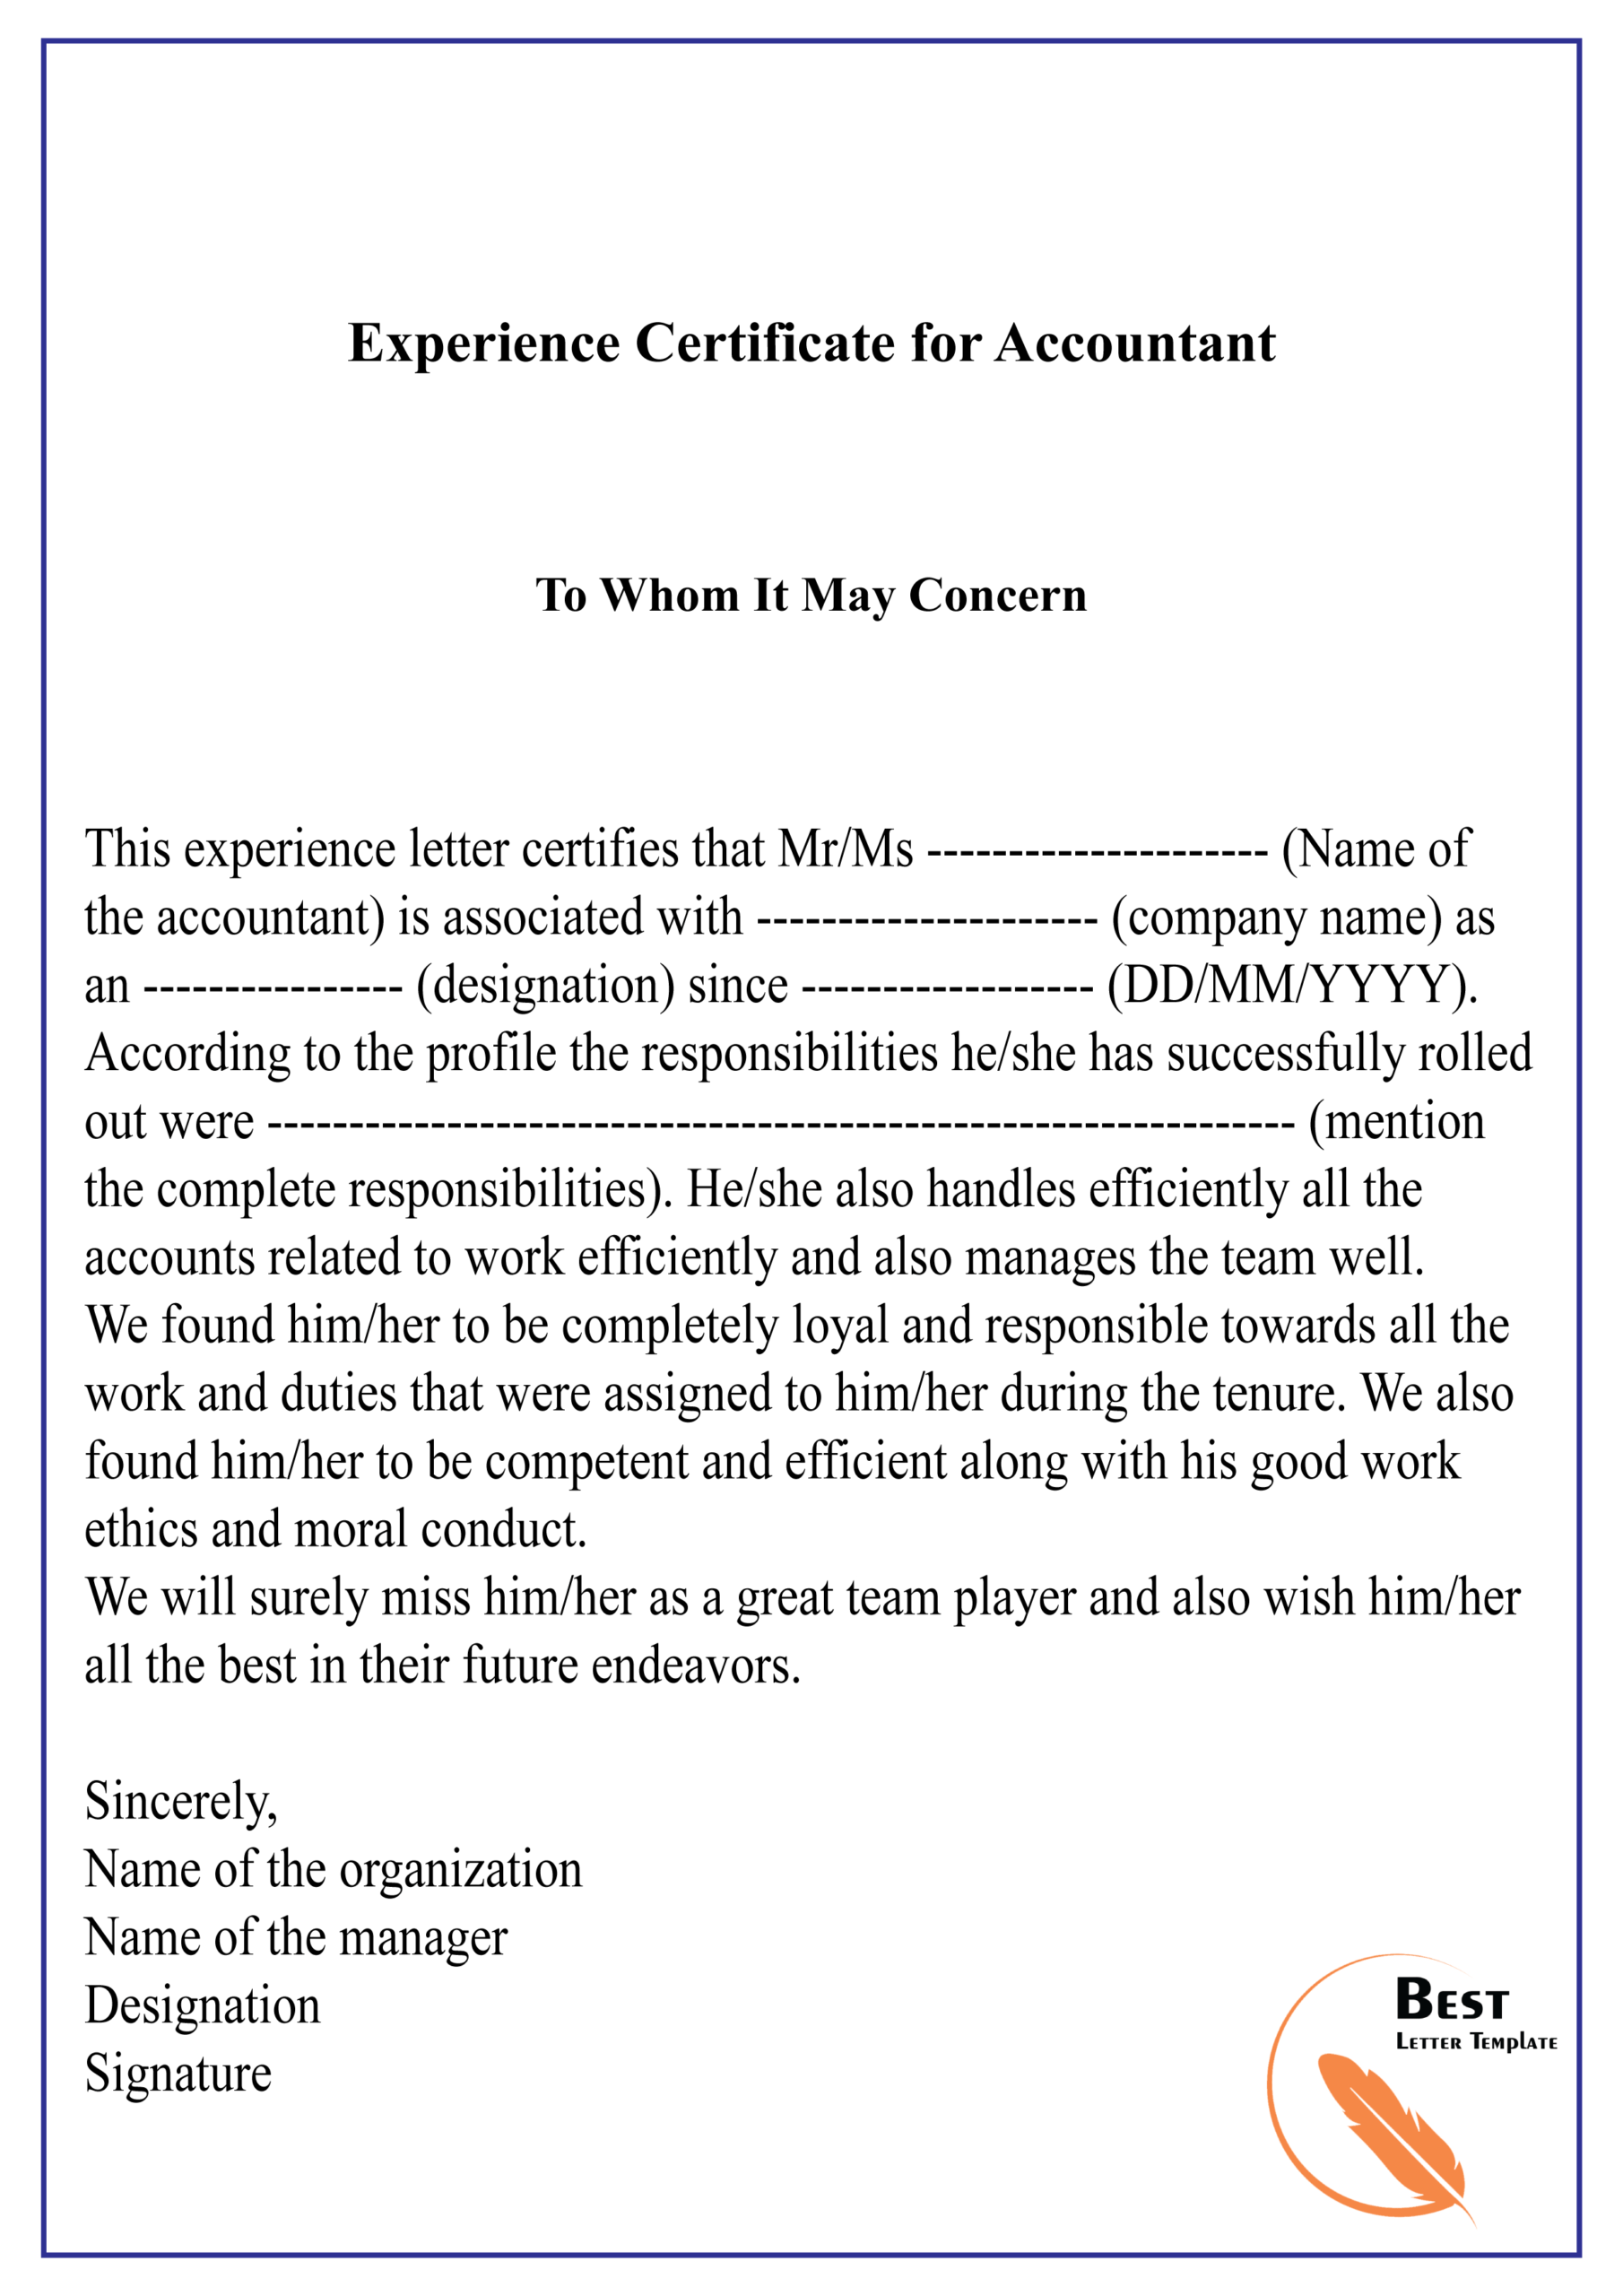 Experience Certificate For Accountant 01 | Best Letter Template With Regard To Certificate Of Experience Template